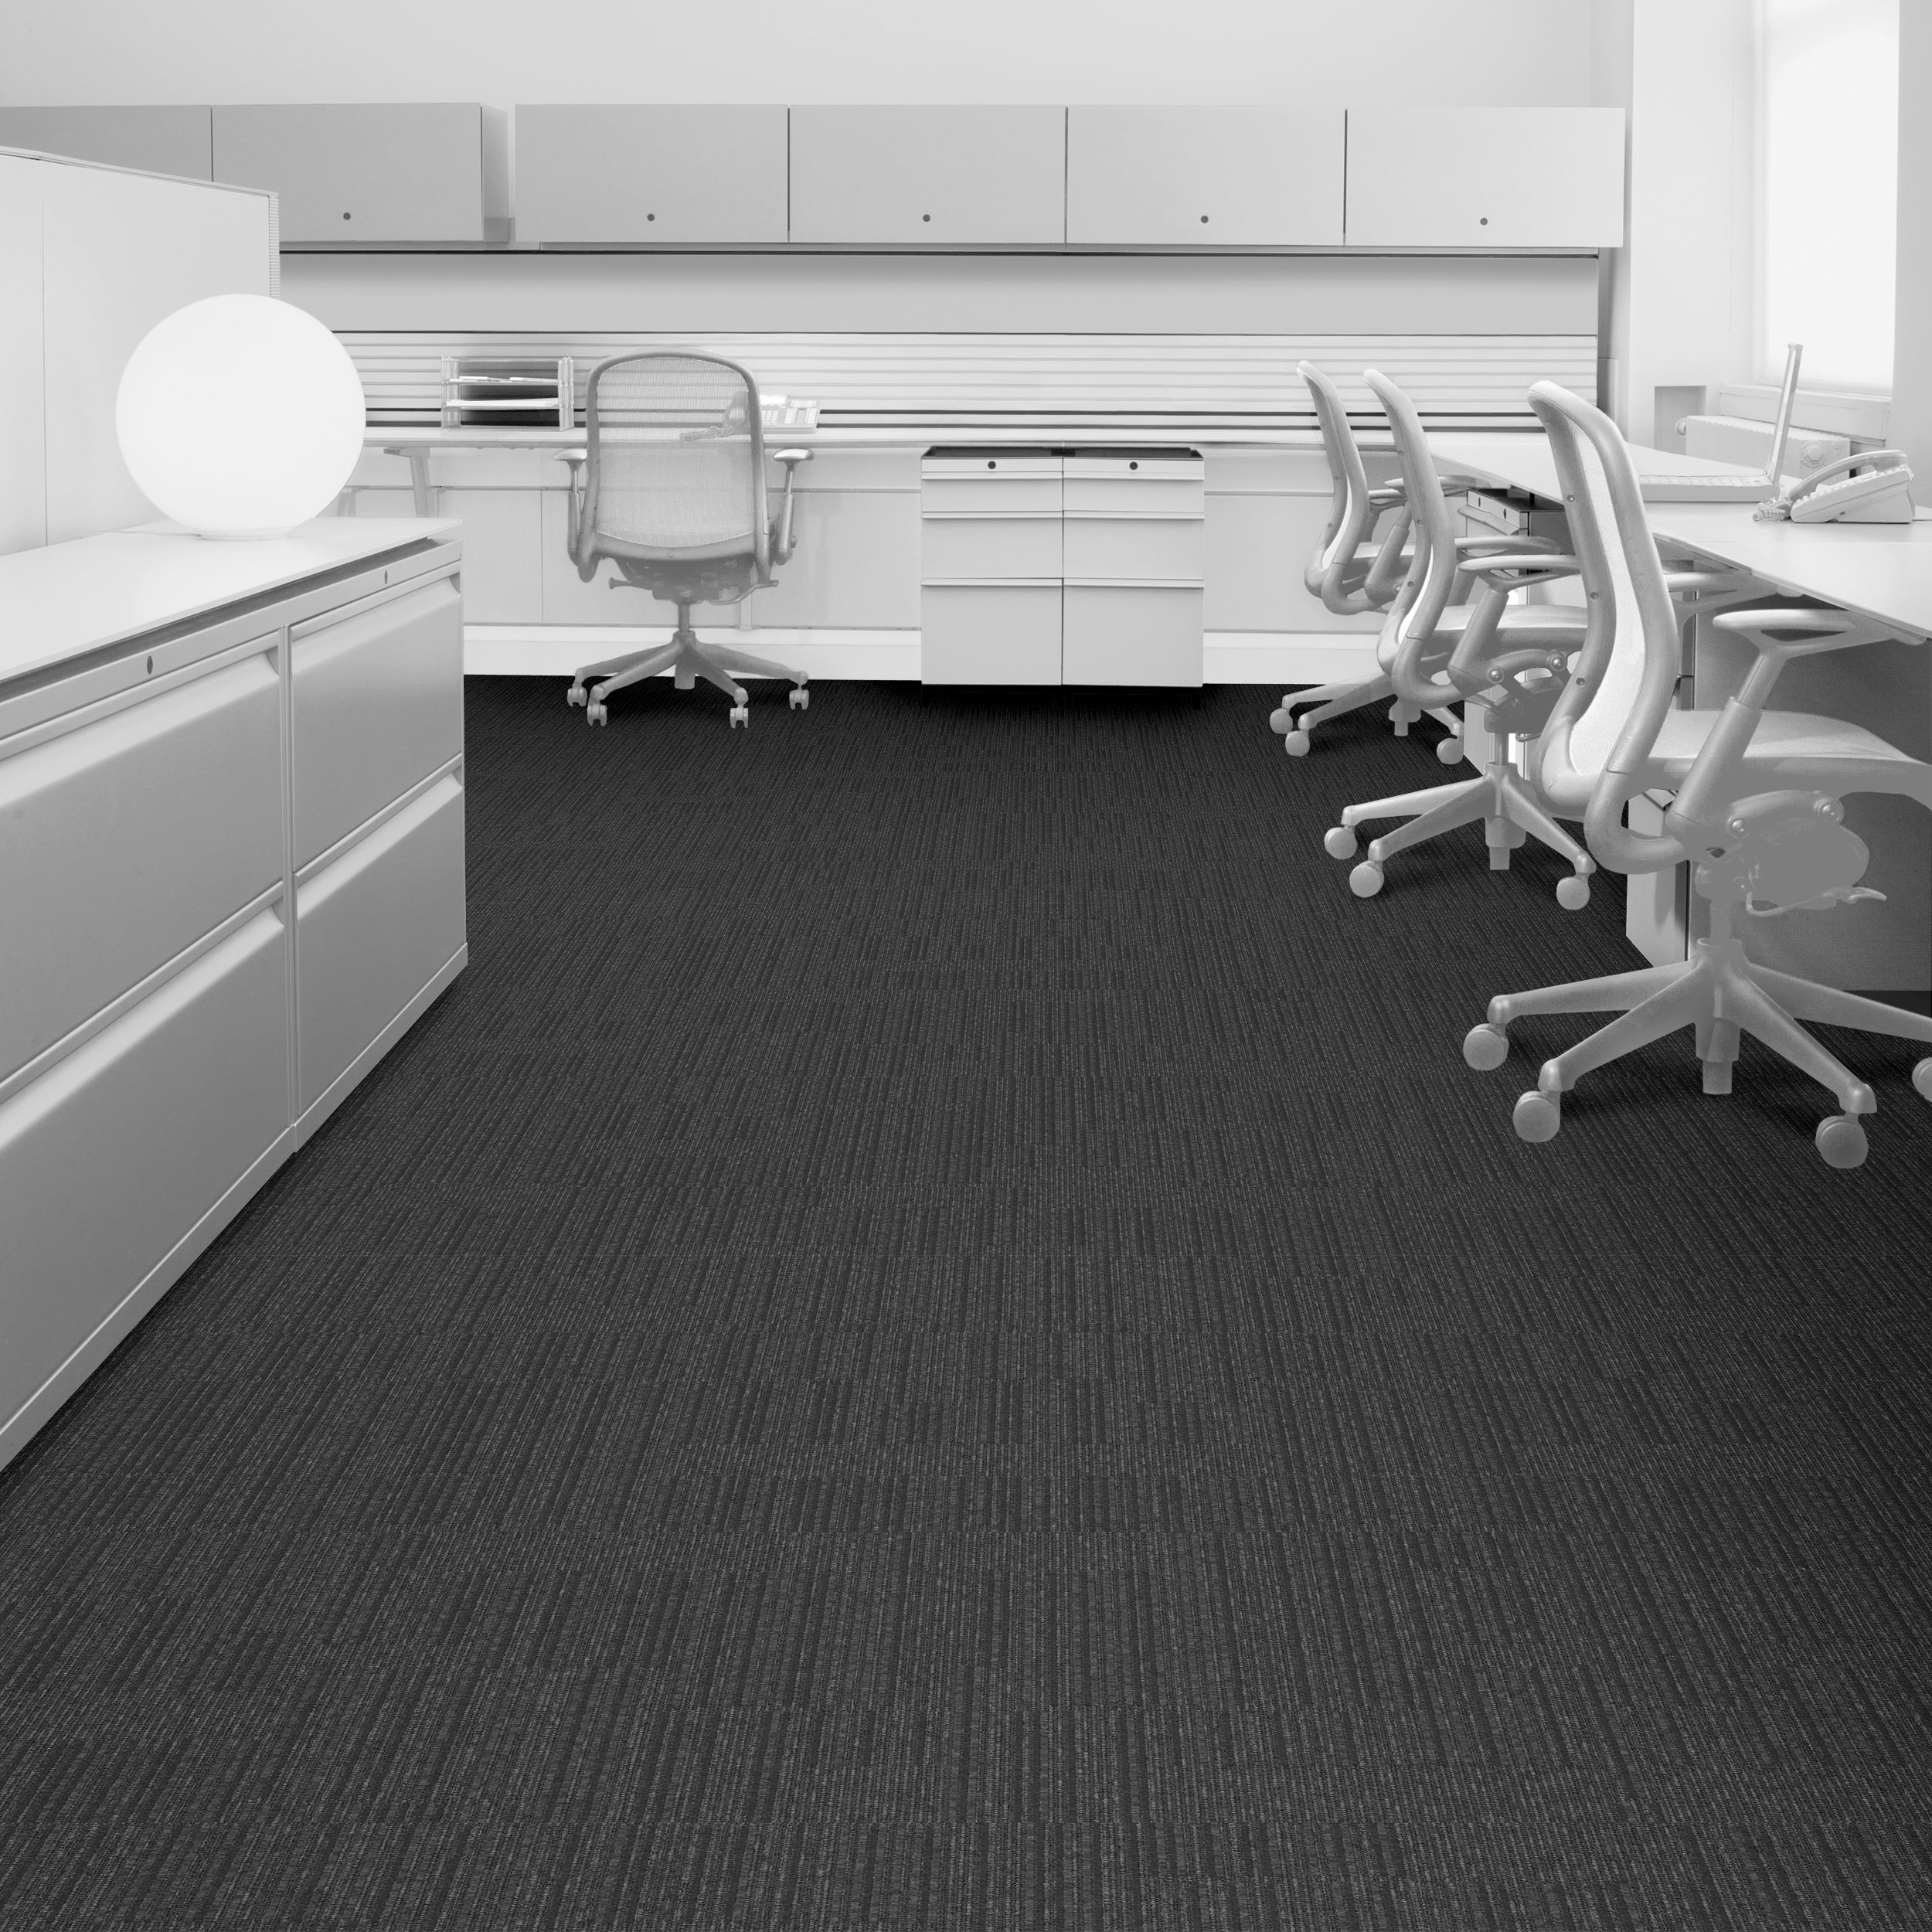 Interface Equilibrium Continuity Carpet Tile in office setting.